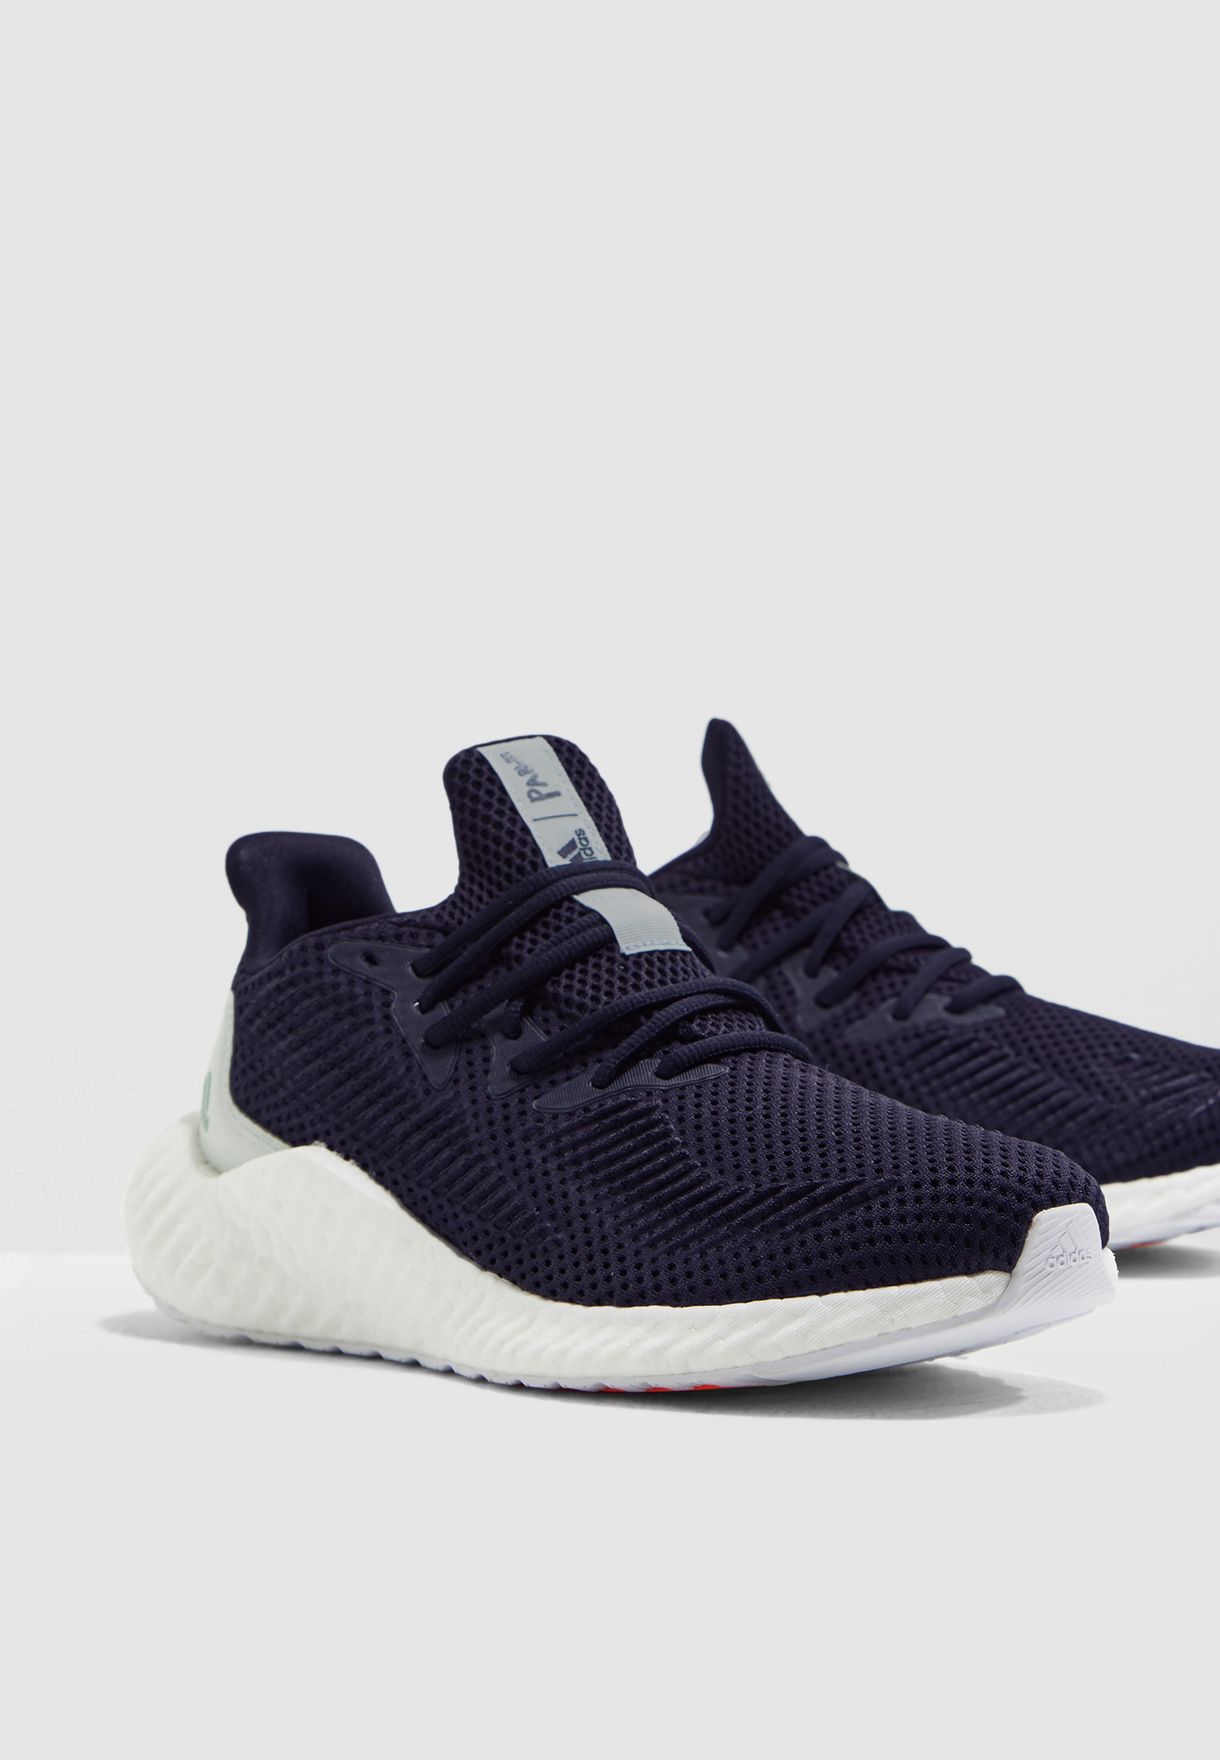 alphaboost parley shoes